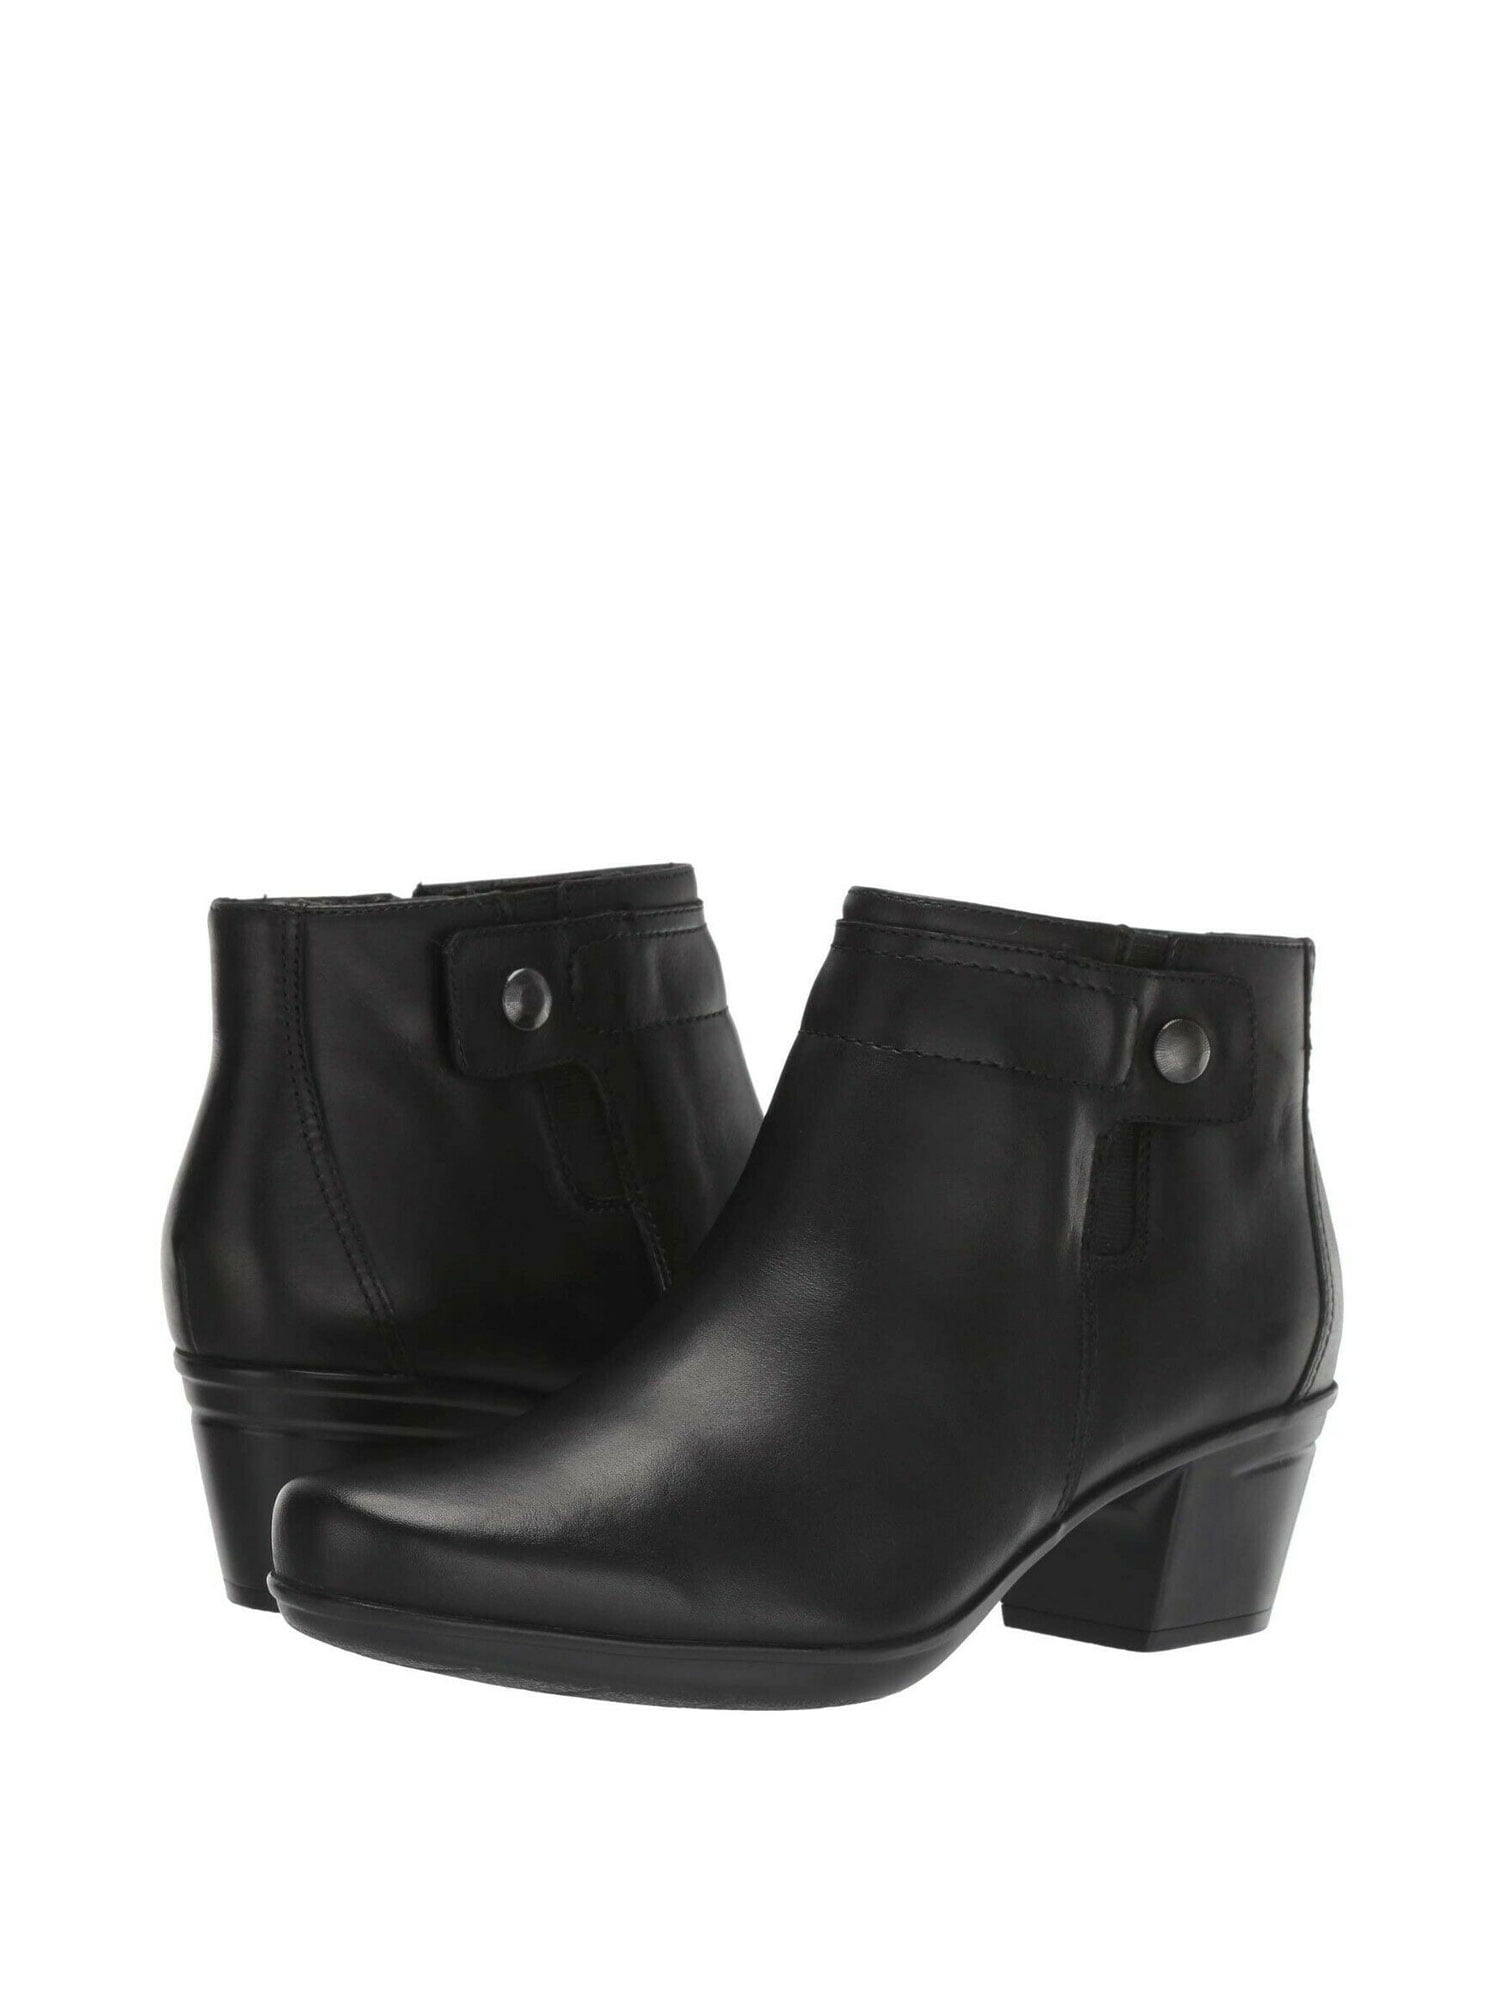 clarks black ankle booties